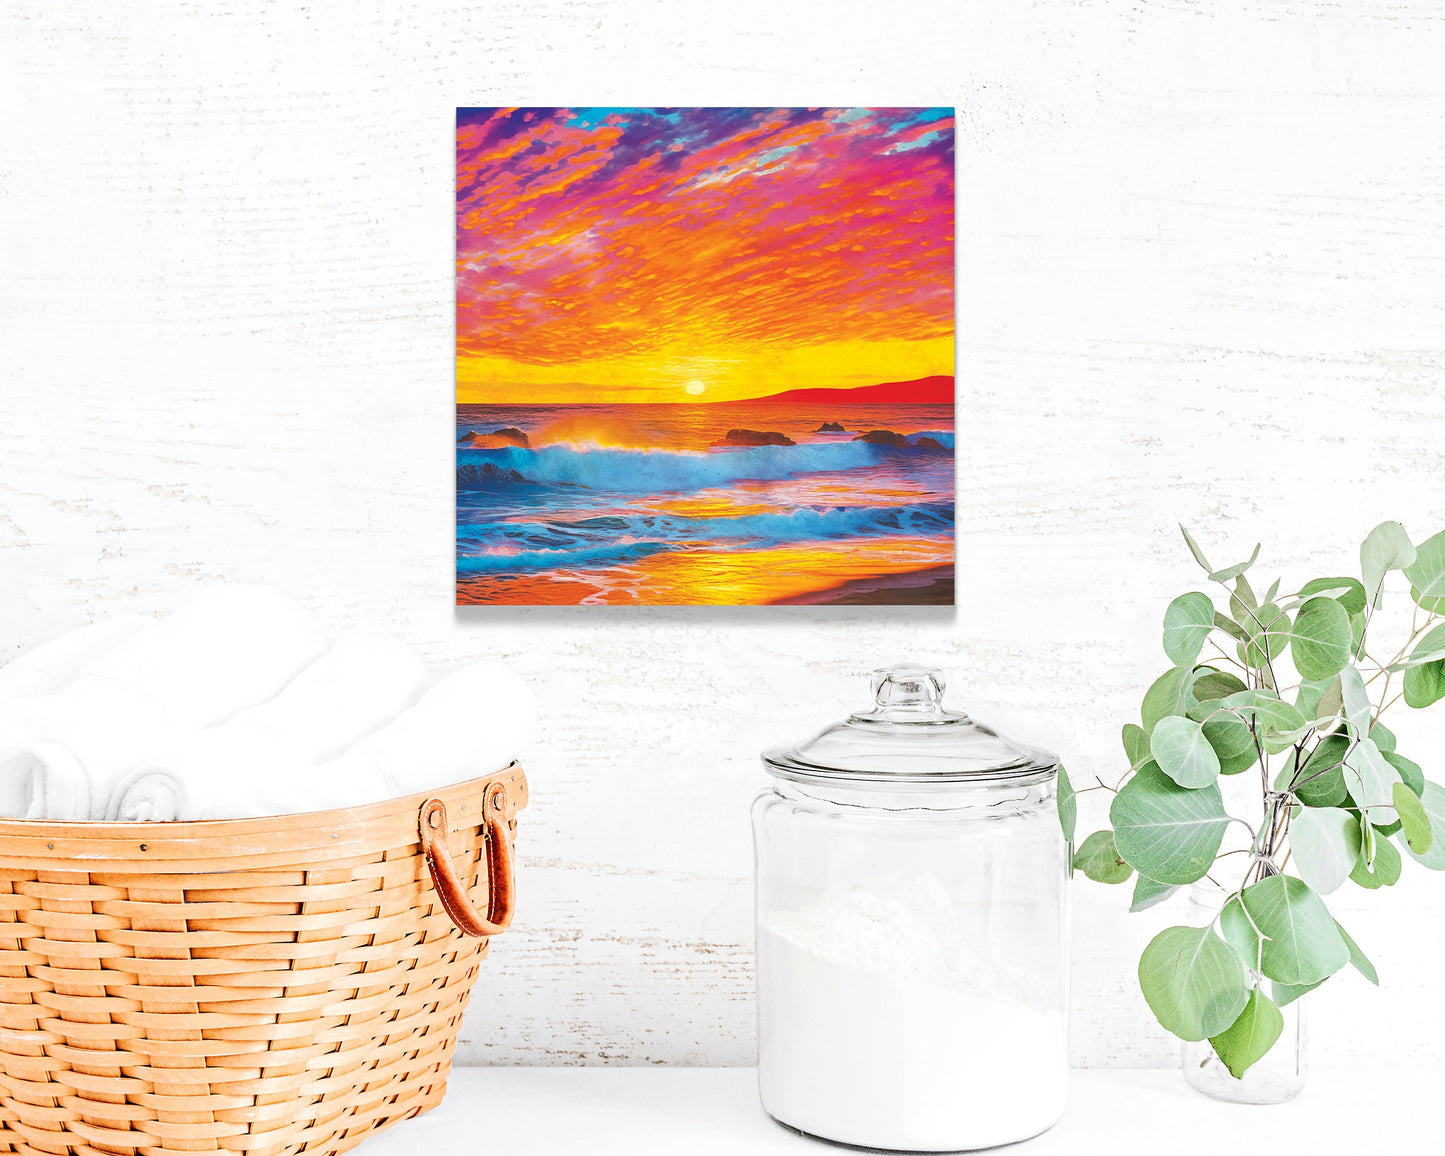 12in Sunset Paints the Sky Canvas Wall Art, Wall Canvas Printing, Canvas Wall Art, Living Room Decor